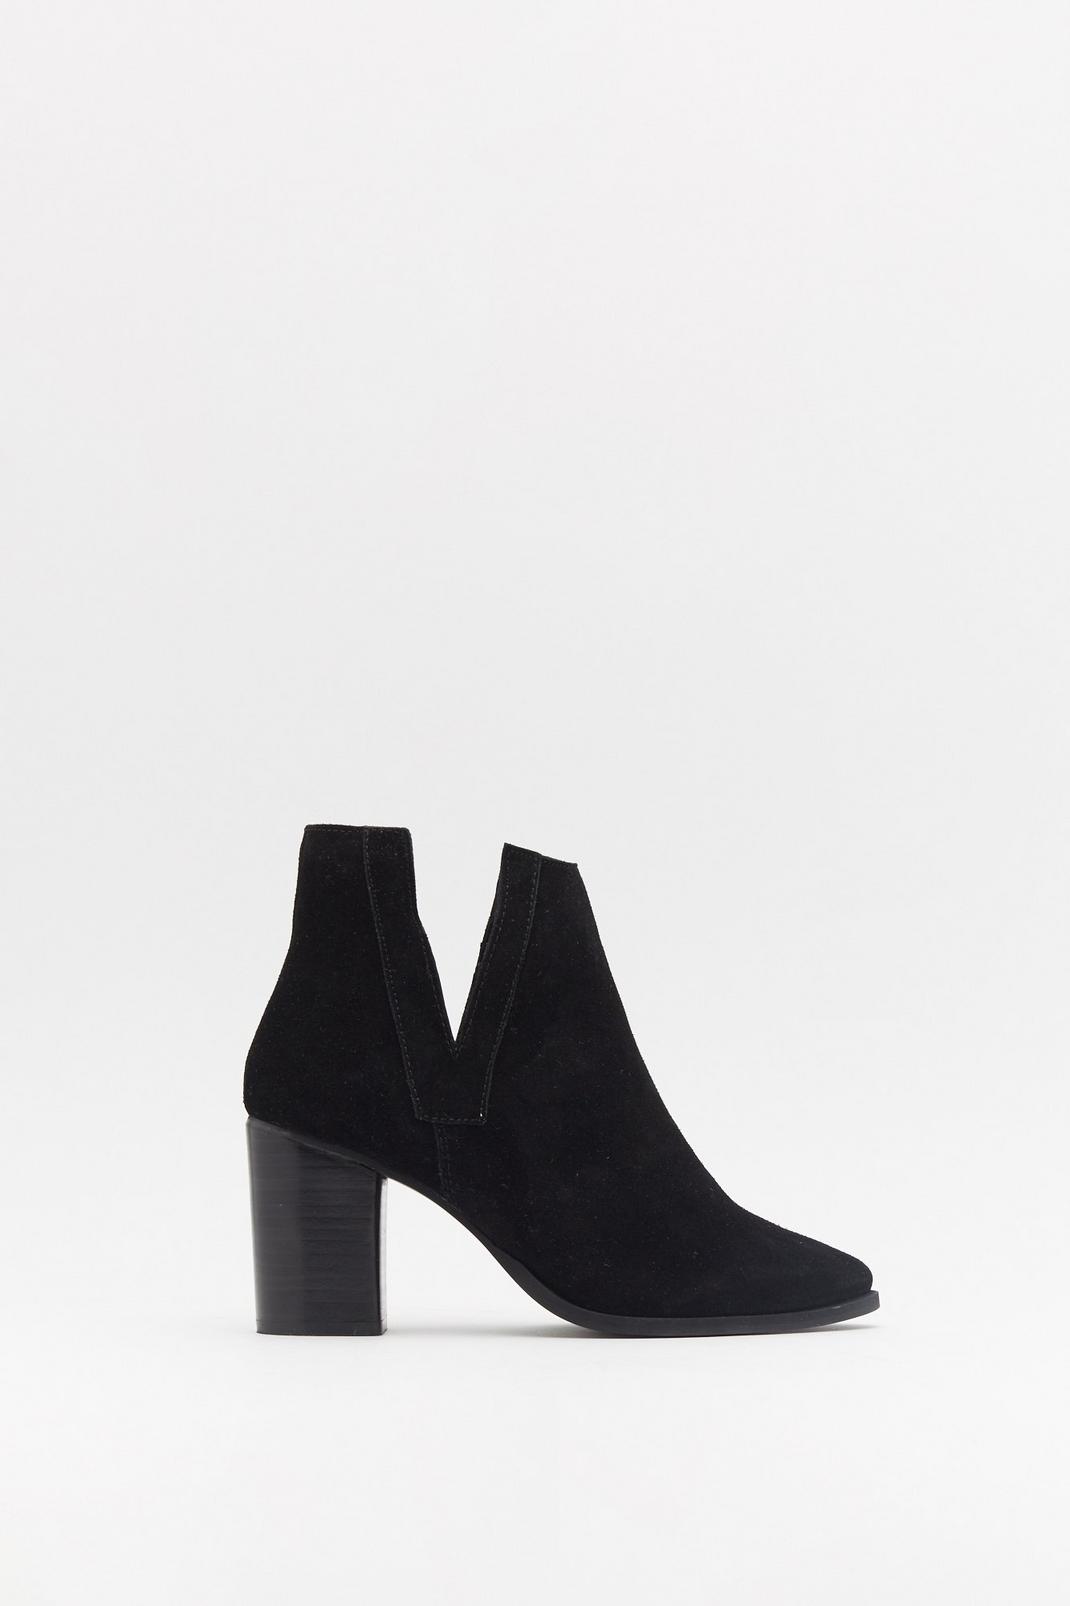 V Gusset Cut Out Heeled Suede Boots image number 1